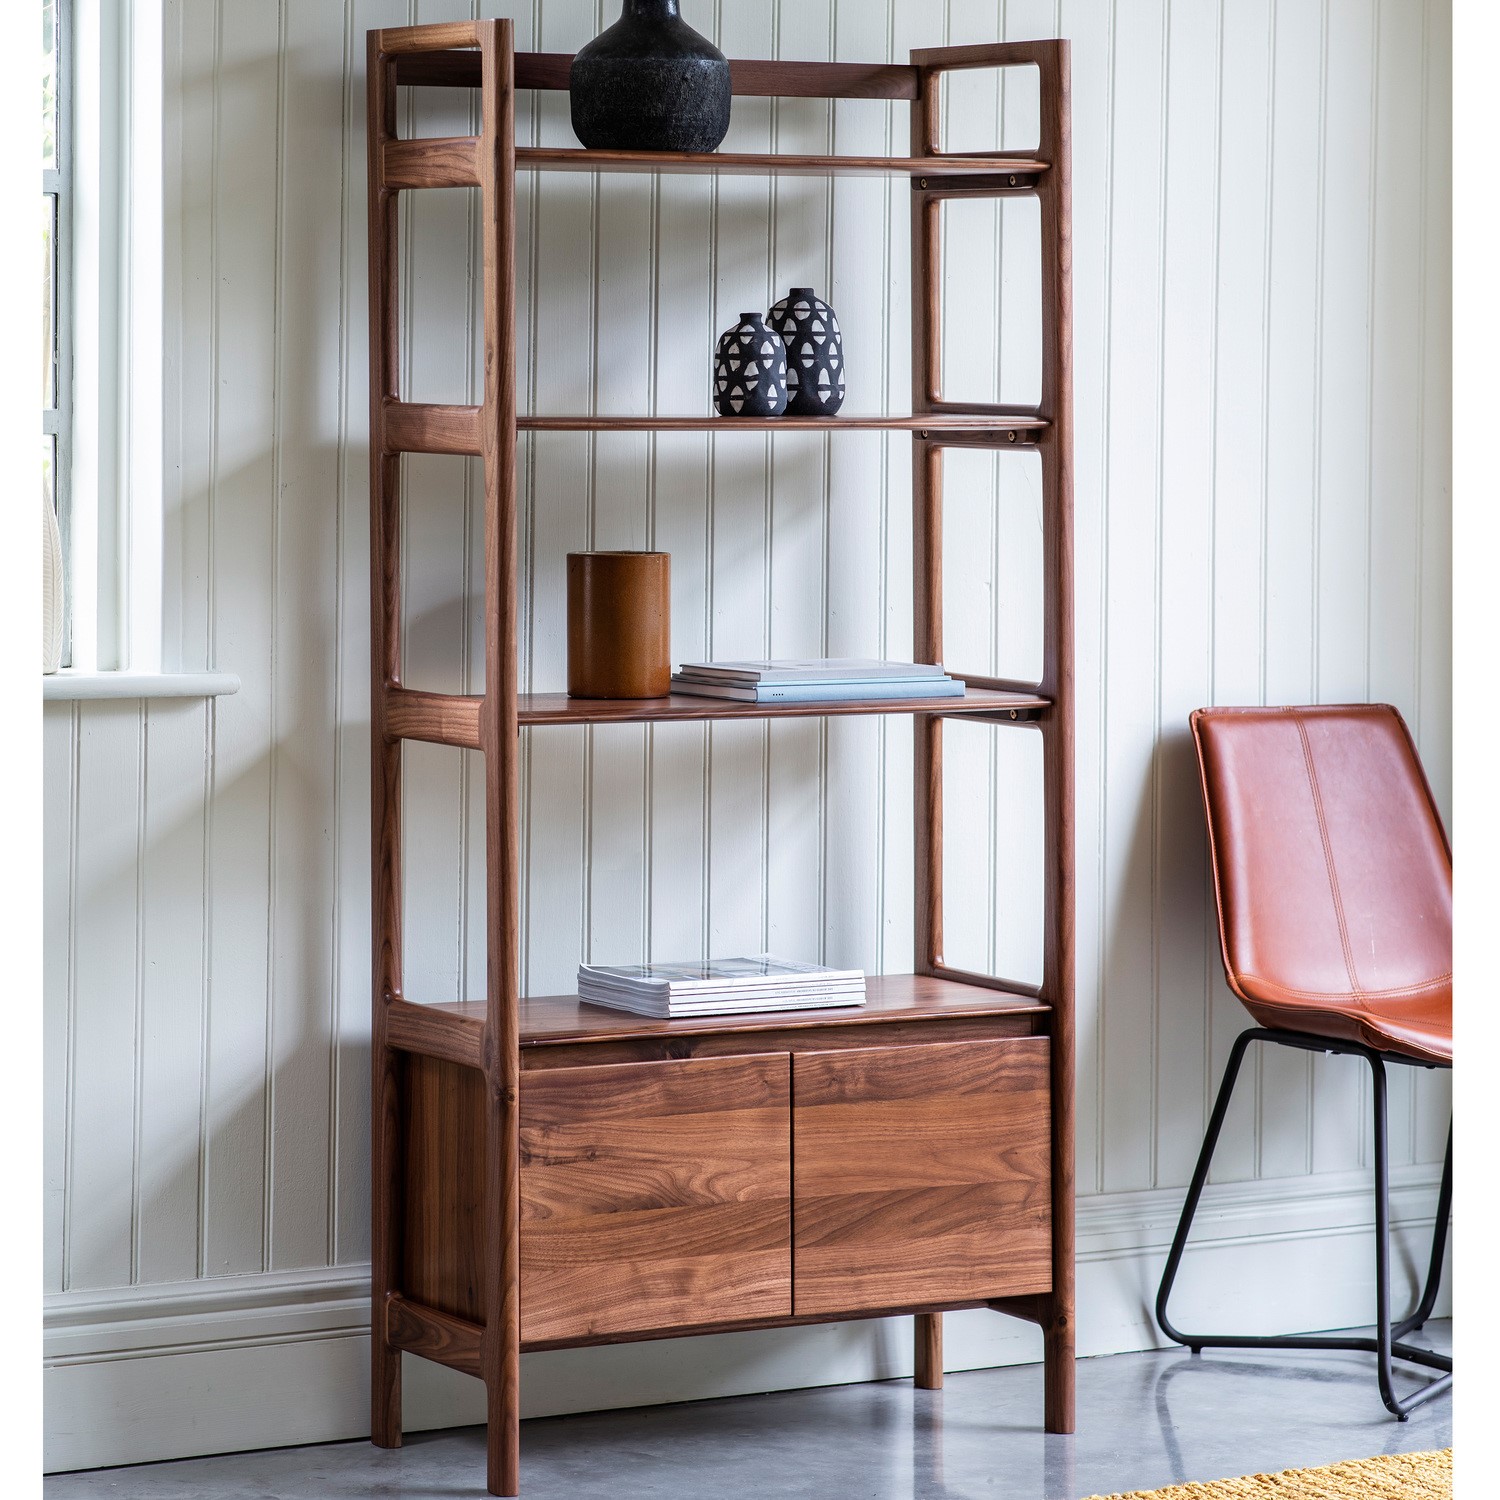 Read more about Madrid bookcase with open display walnut caspian house